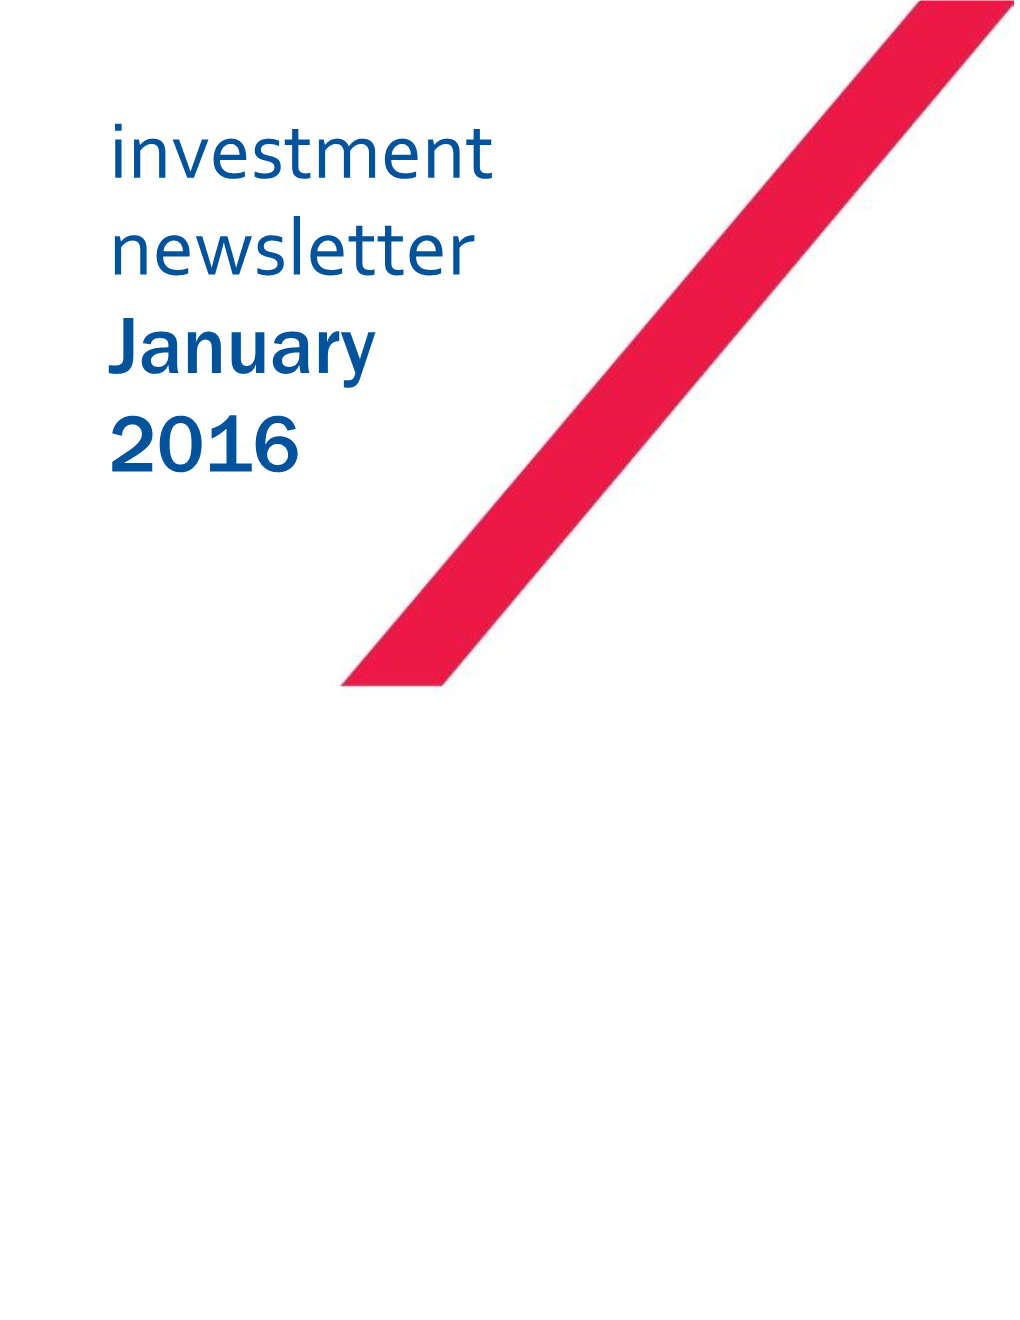 Combined Bharti Investment Newsletter January 2016